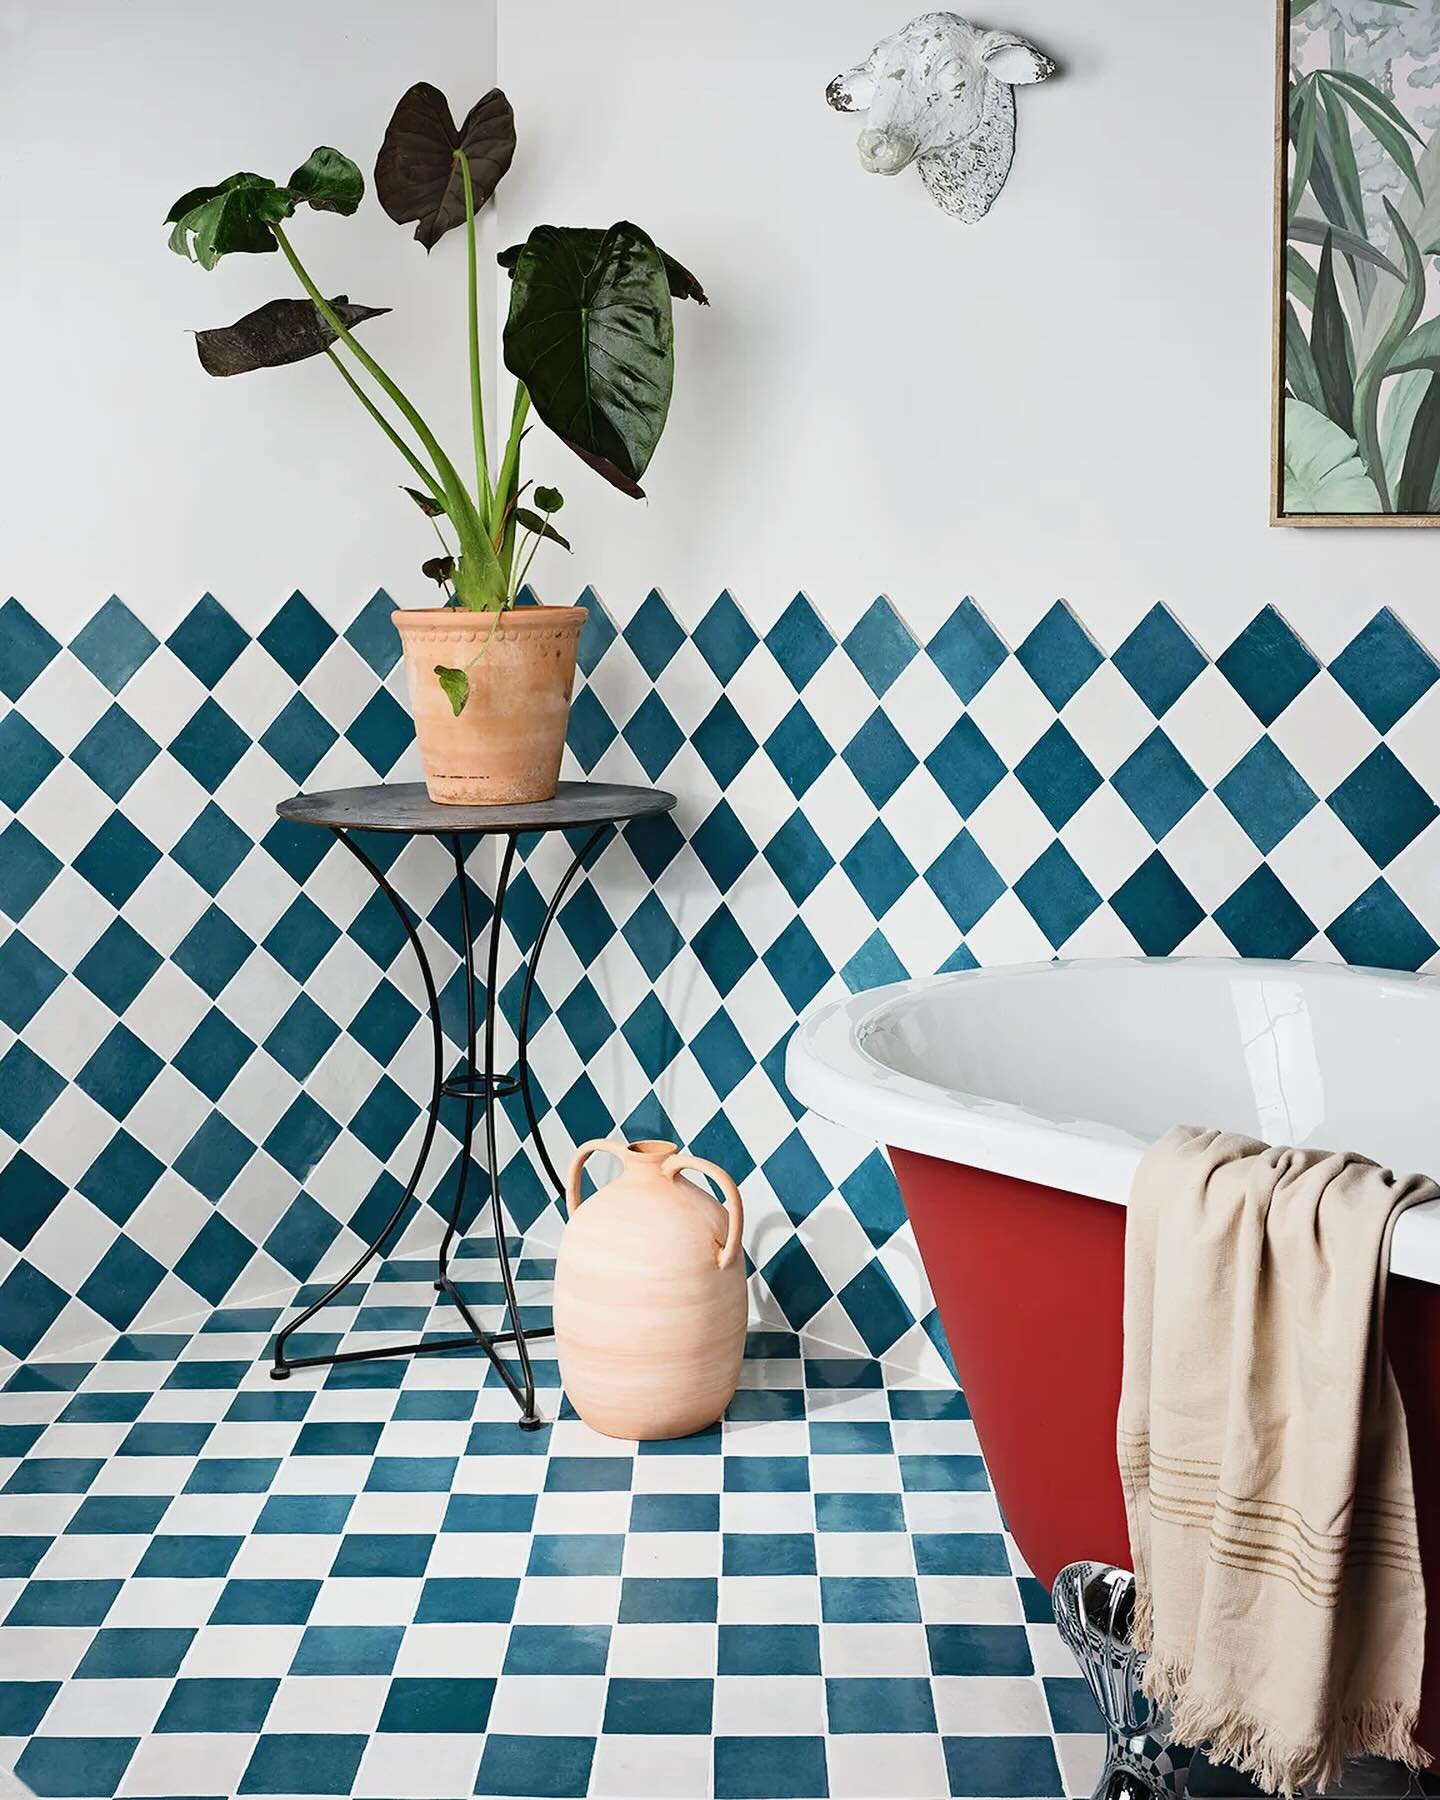 &ldquo;Dive into the rustic allure of grout-less Moroccan Zellige tiles from @capietra 🌿 A celebration of imperfection and history, these handcrafted beauties transform spaces from simple to chic. Are you ready to bring a touch of Moroccan magic to 